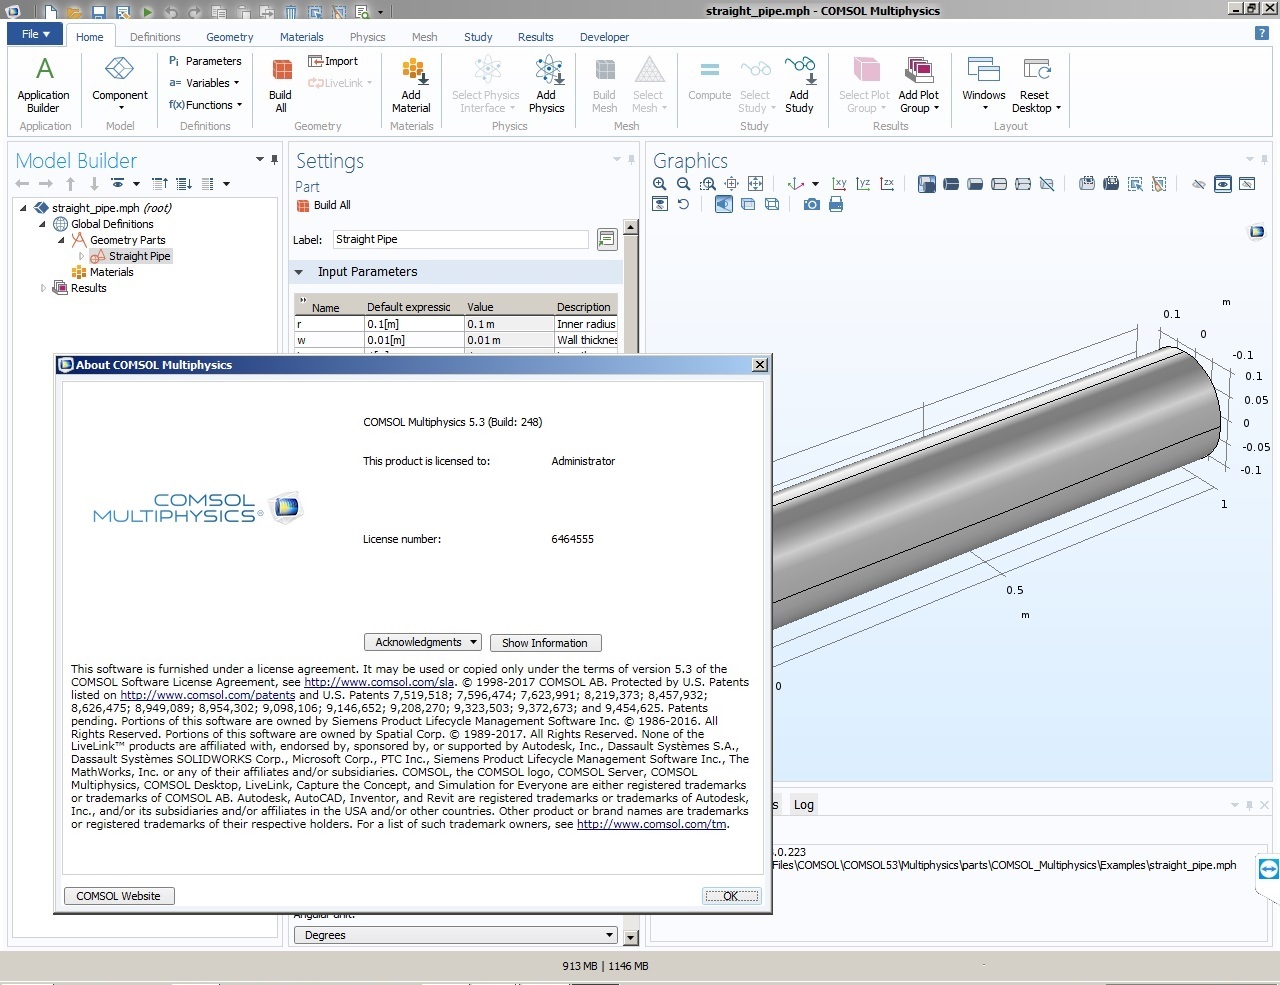 Working with Comsol Multiphysics 5.3 Build 248 full license